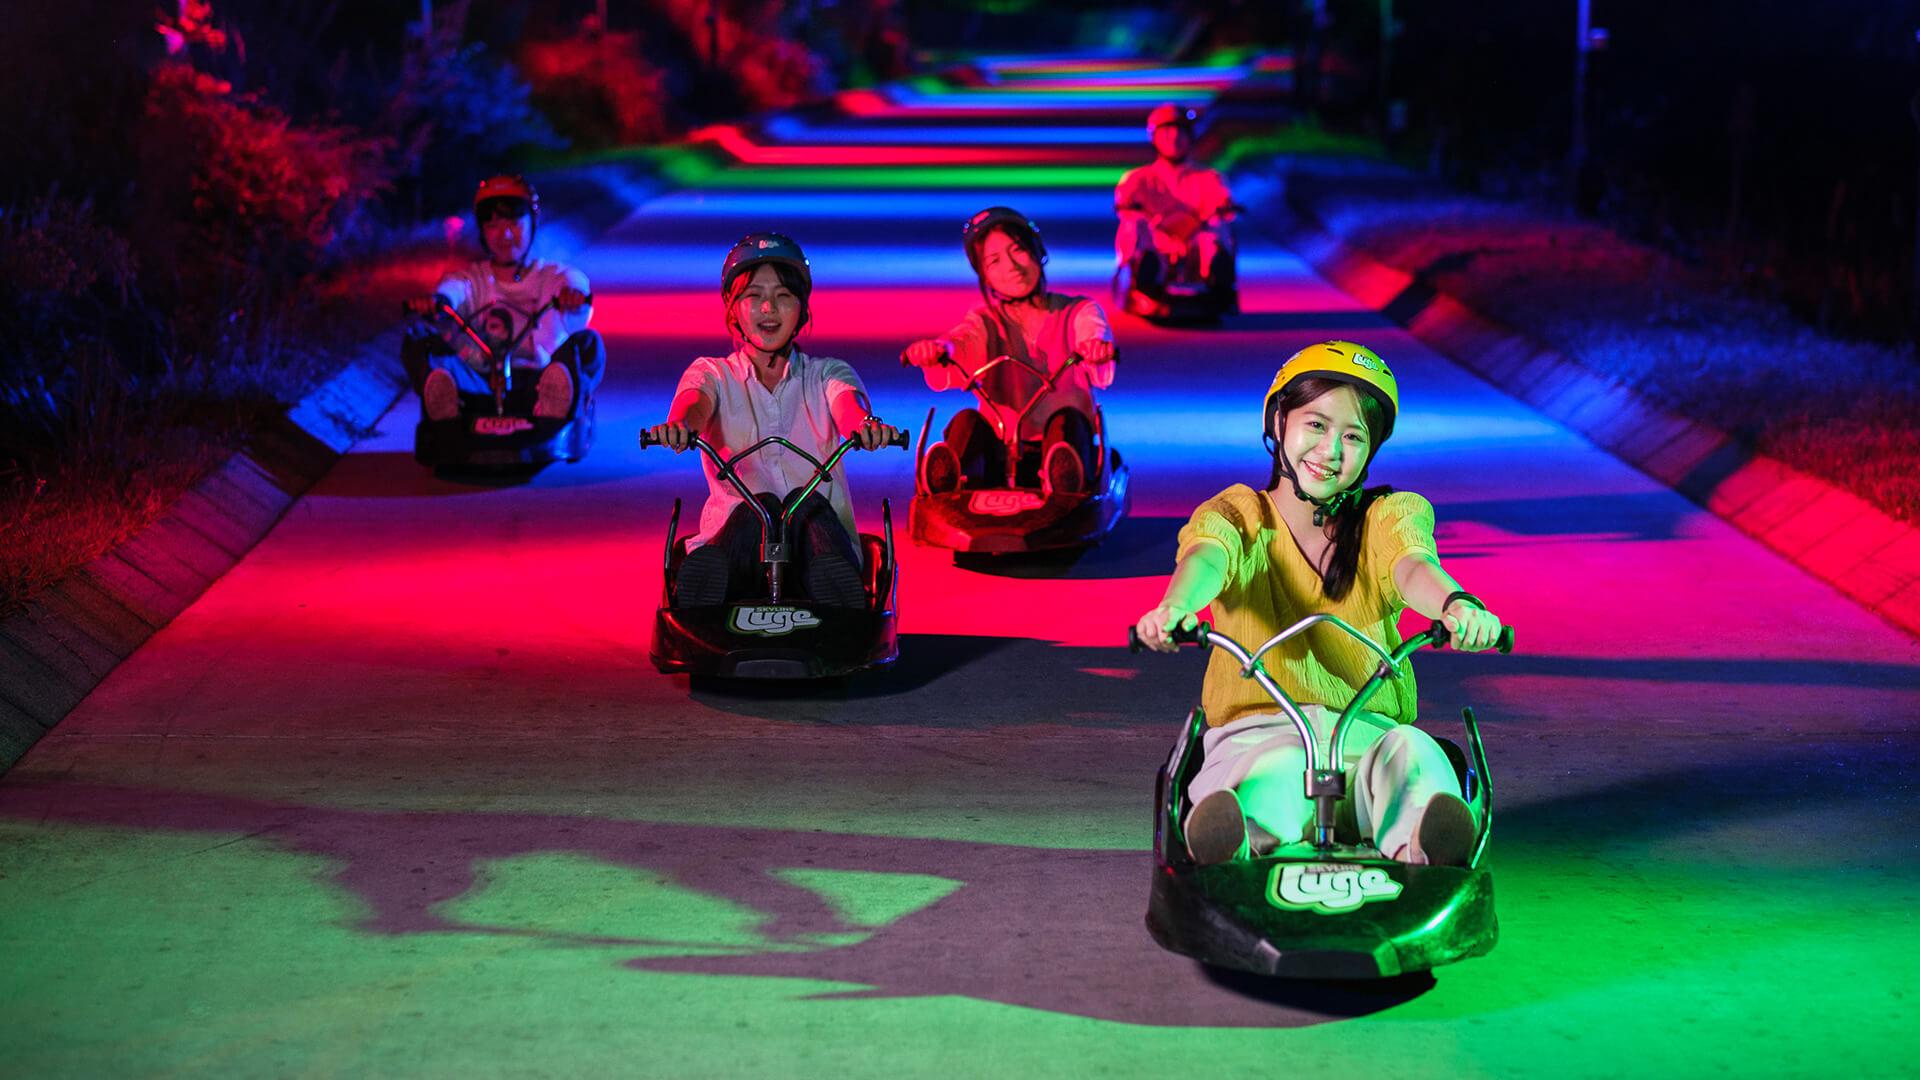 A group of people head down the tracks on the Night Luge at Skyline Luge Tongyeong.